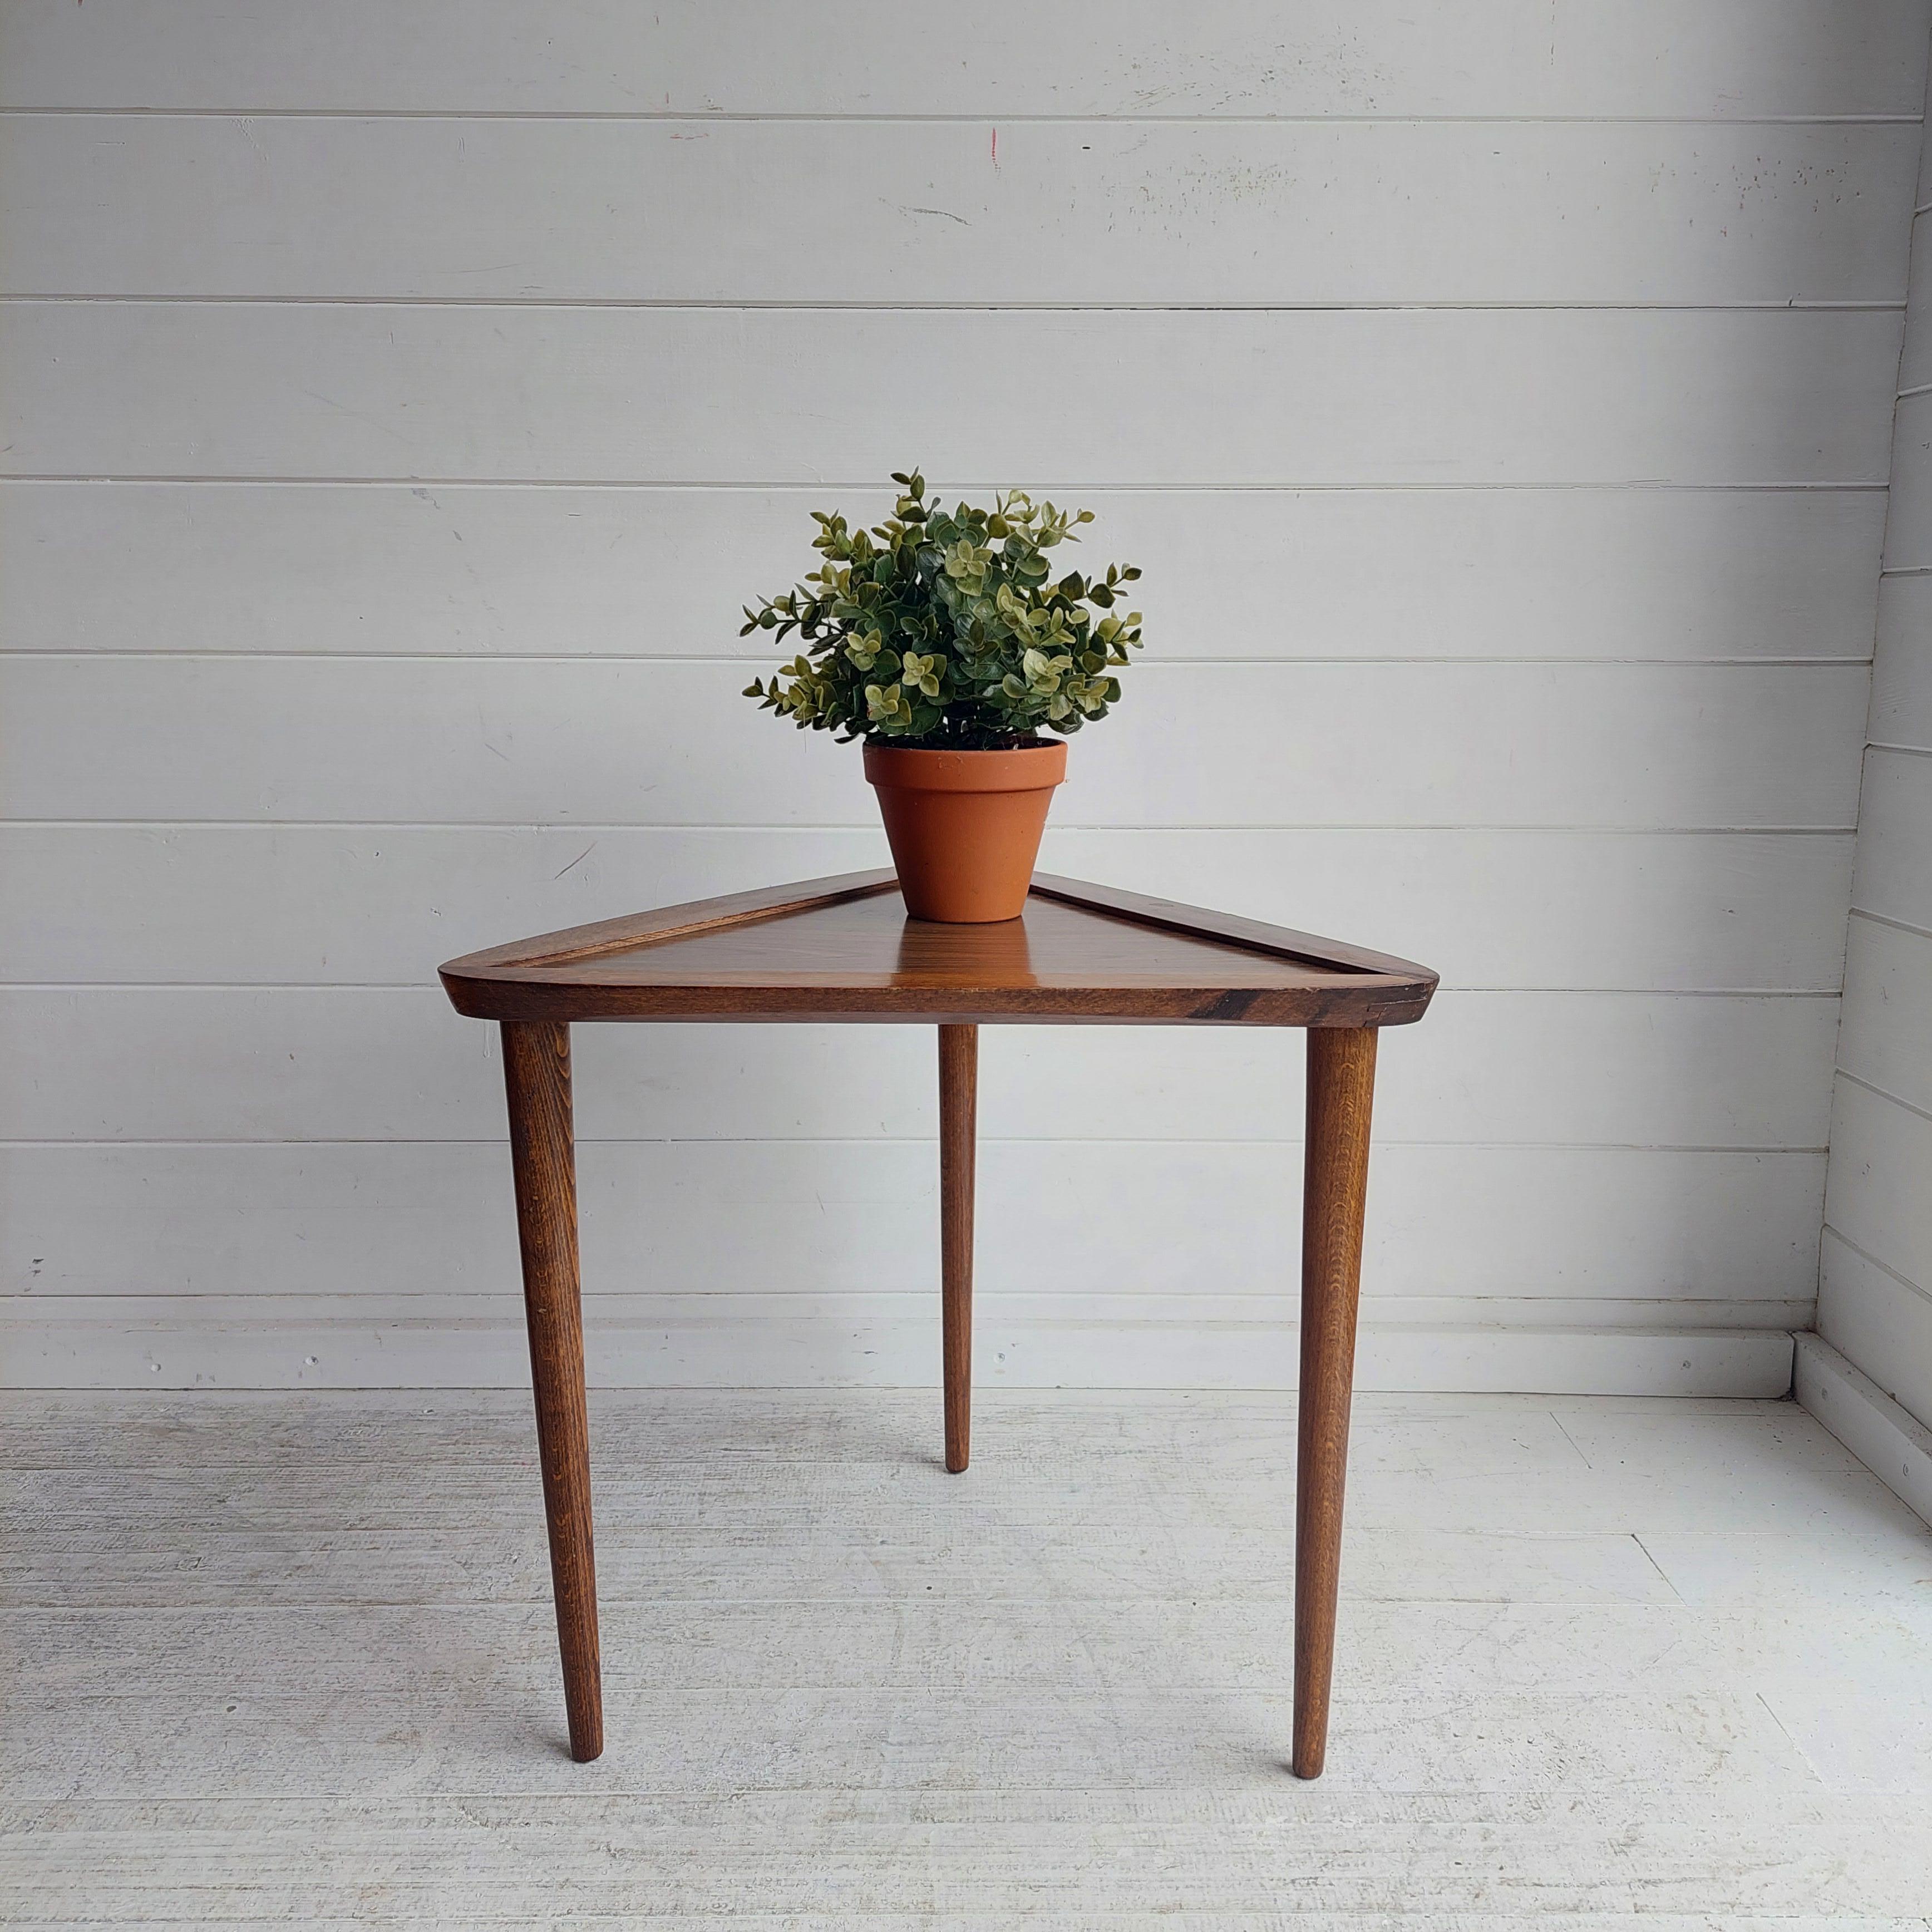 50/60s MCM Vintage Corner Table / Plant Stand- Teak w/ Wood Effect Top - Mid Century Occasional Triangular Coffee Table - Triangle Side Table

A fabulous  side table in triangular form. 
Featuring walnut legs and table top frame with a Formica wood